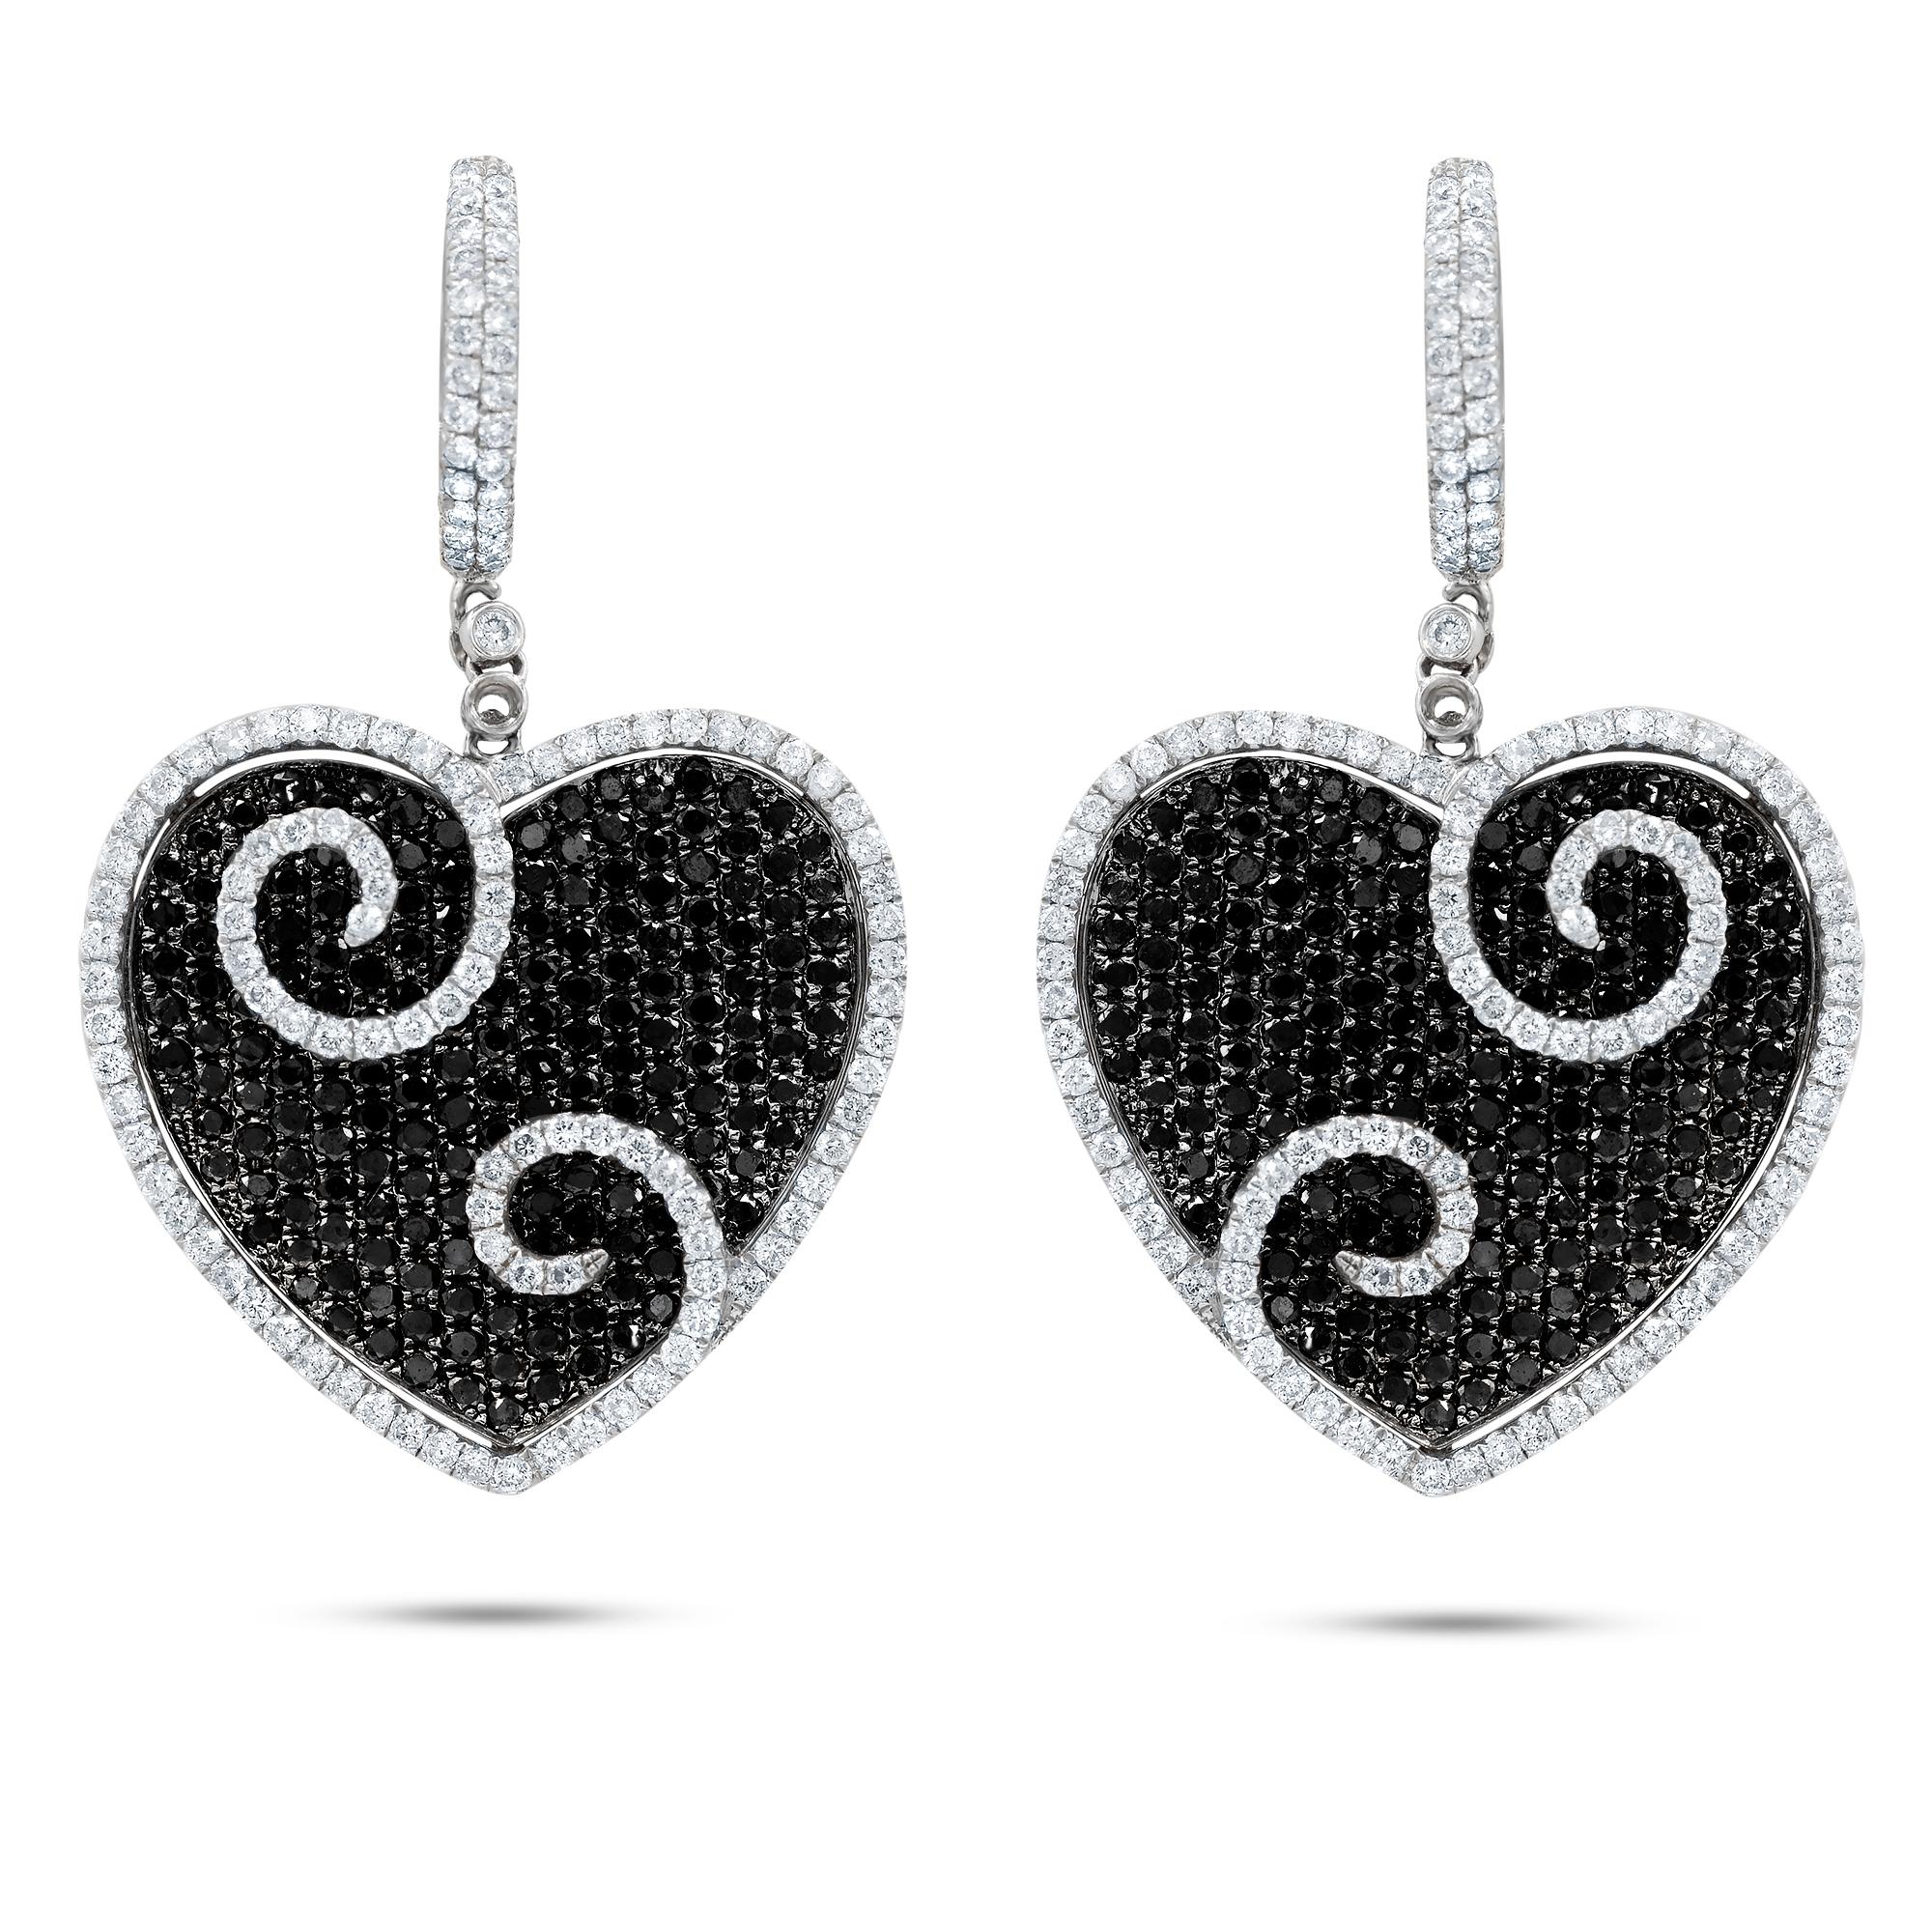 Round Cut Diana M. 18 kt White Gold Diamond Heart Earrings Containing 5.23 cts  For Sale